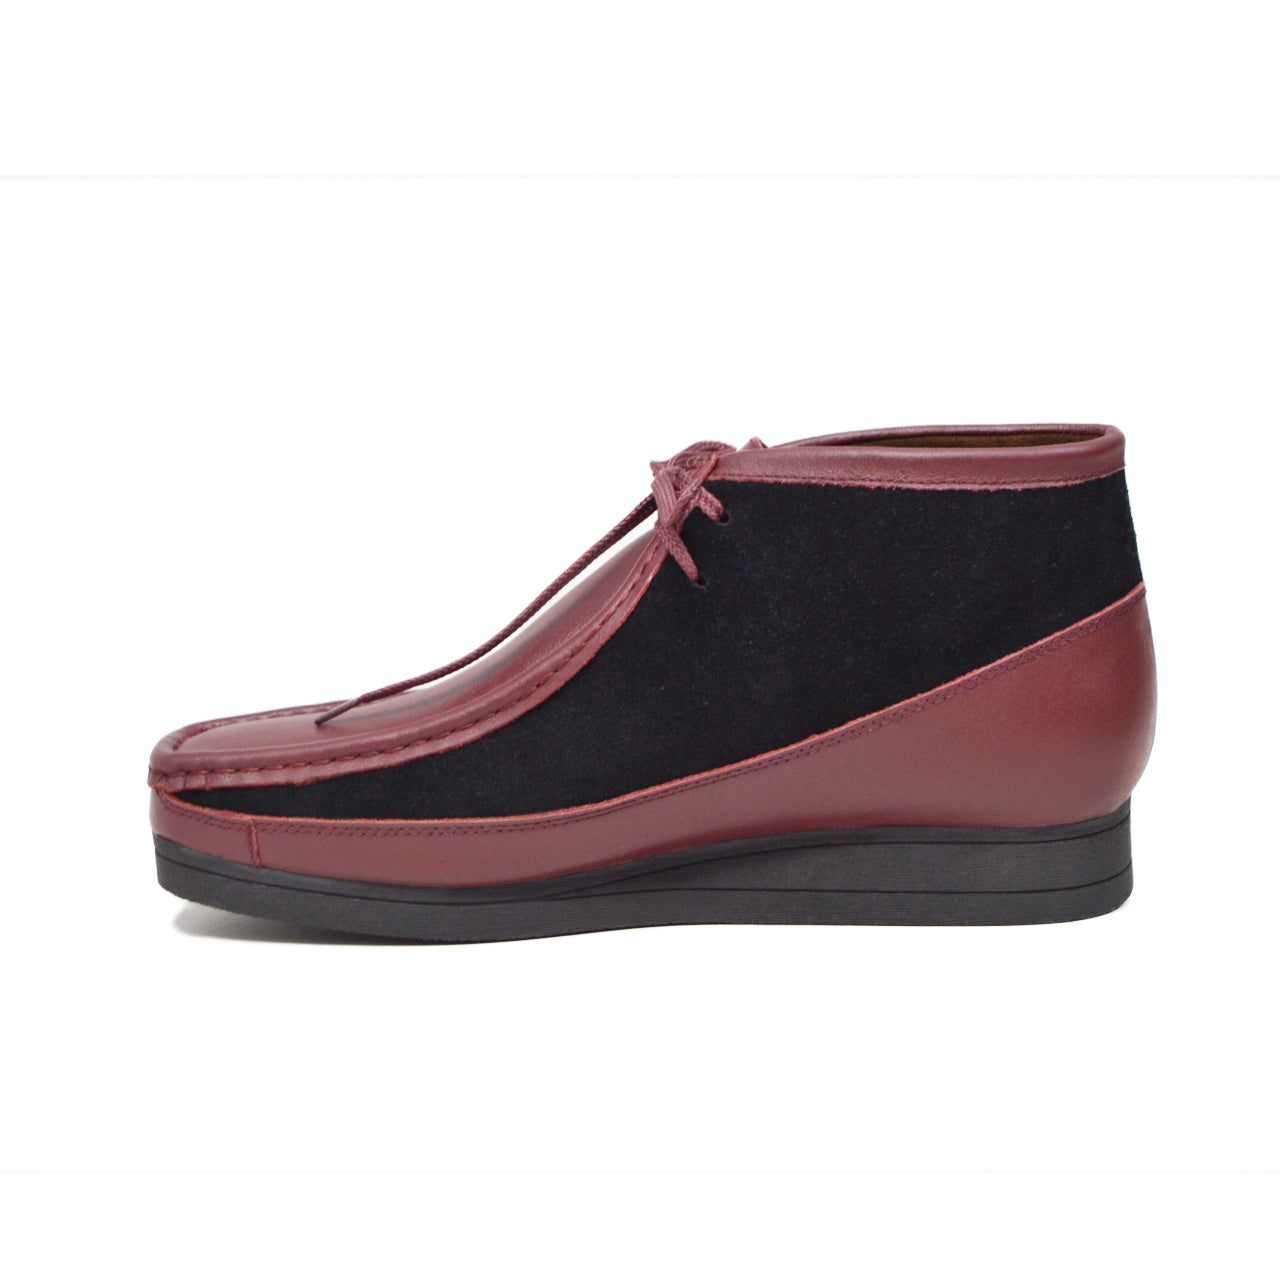 British Walkers New Castle Wallabee Boots Men's Burgundy and Black Suede and Leather Ankle Boots